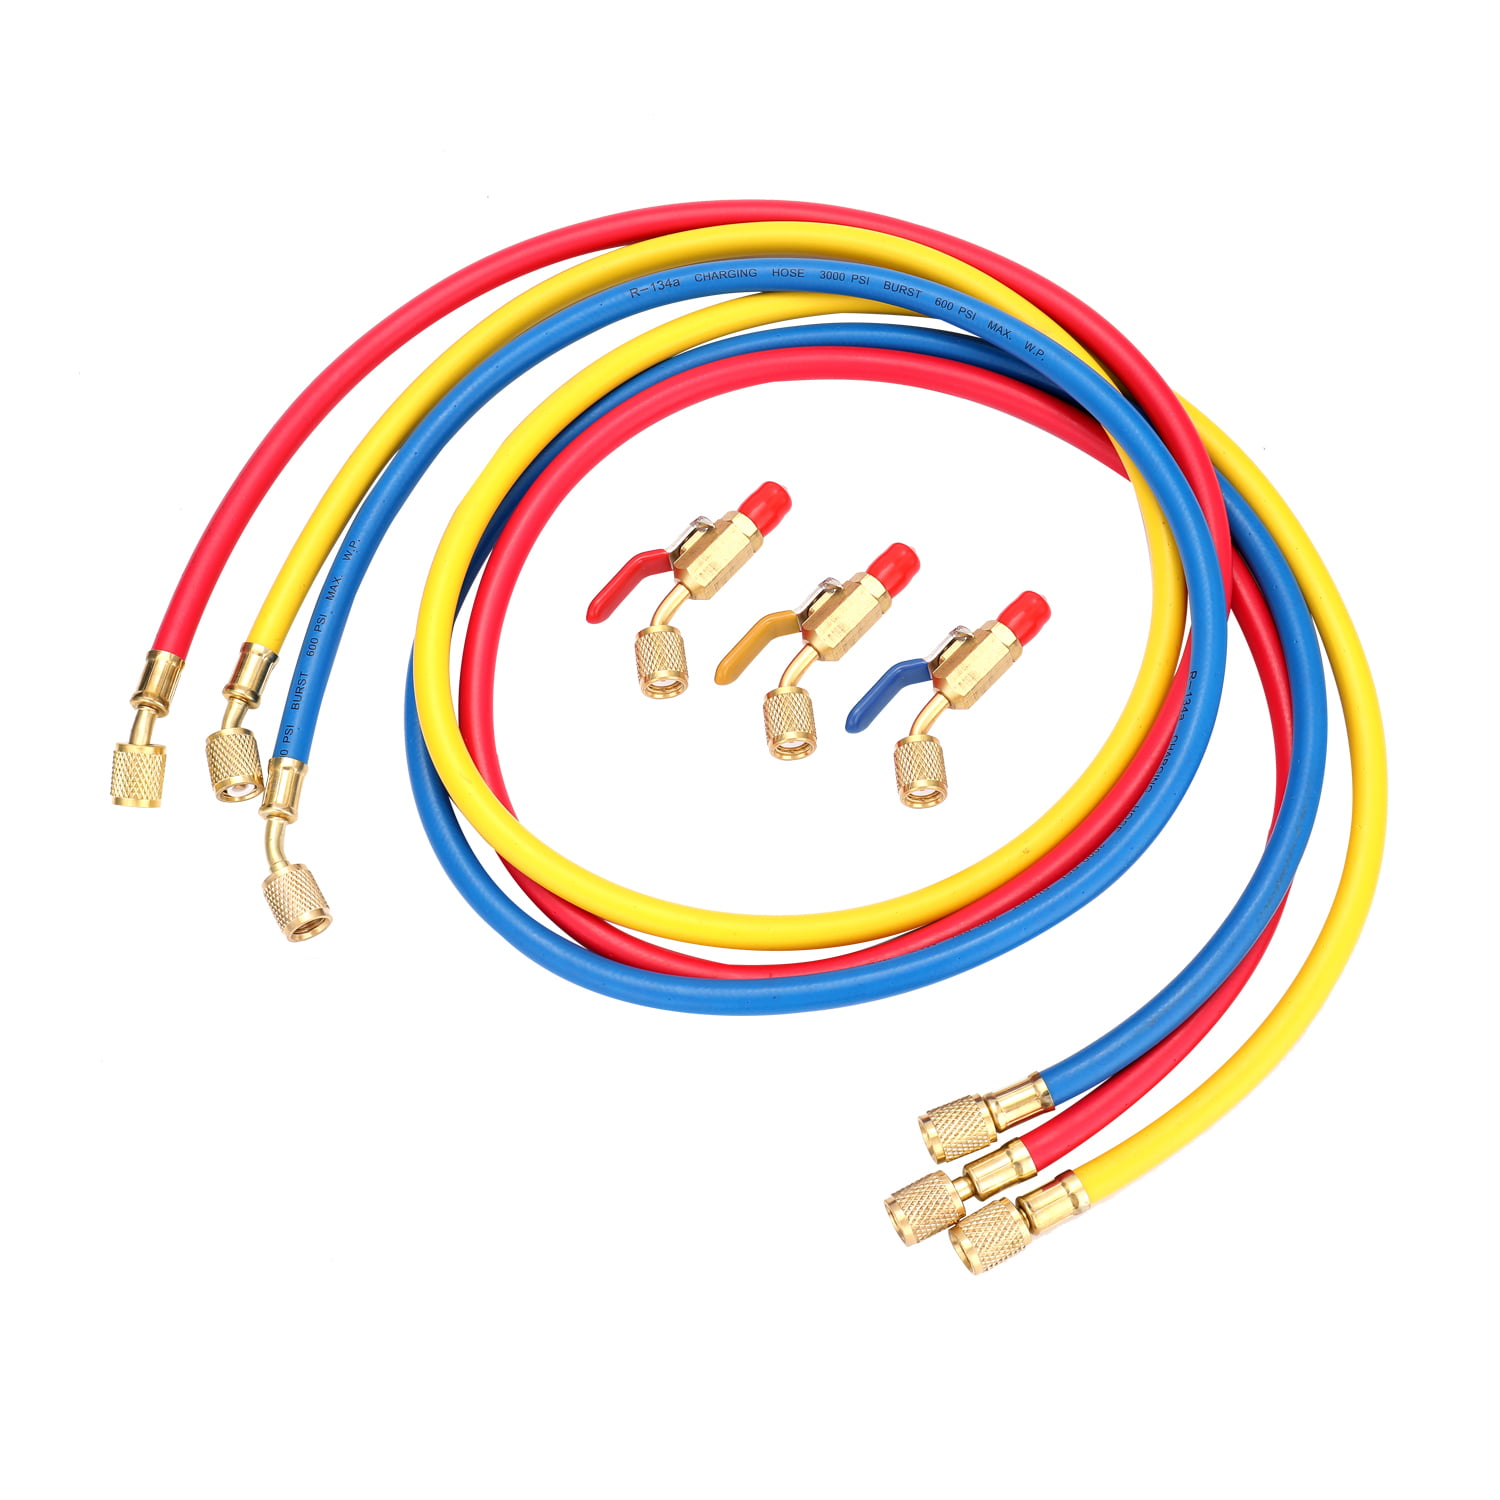 R134a Charging Hose Set  72" Yellow Blue and Red 